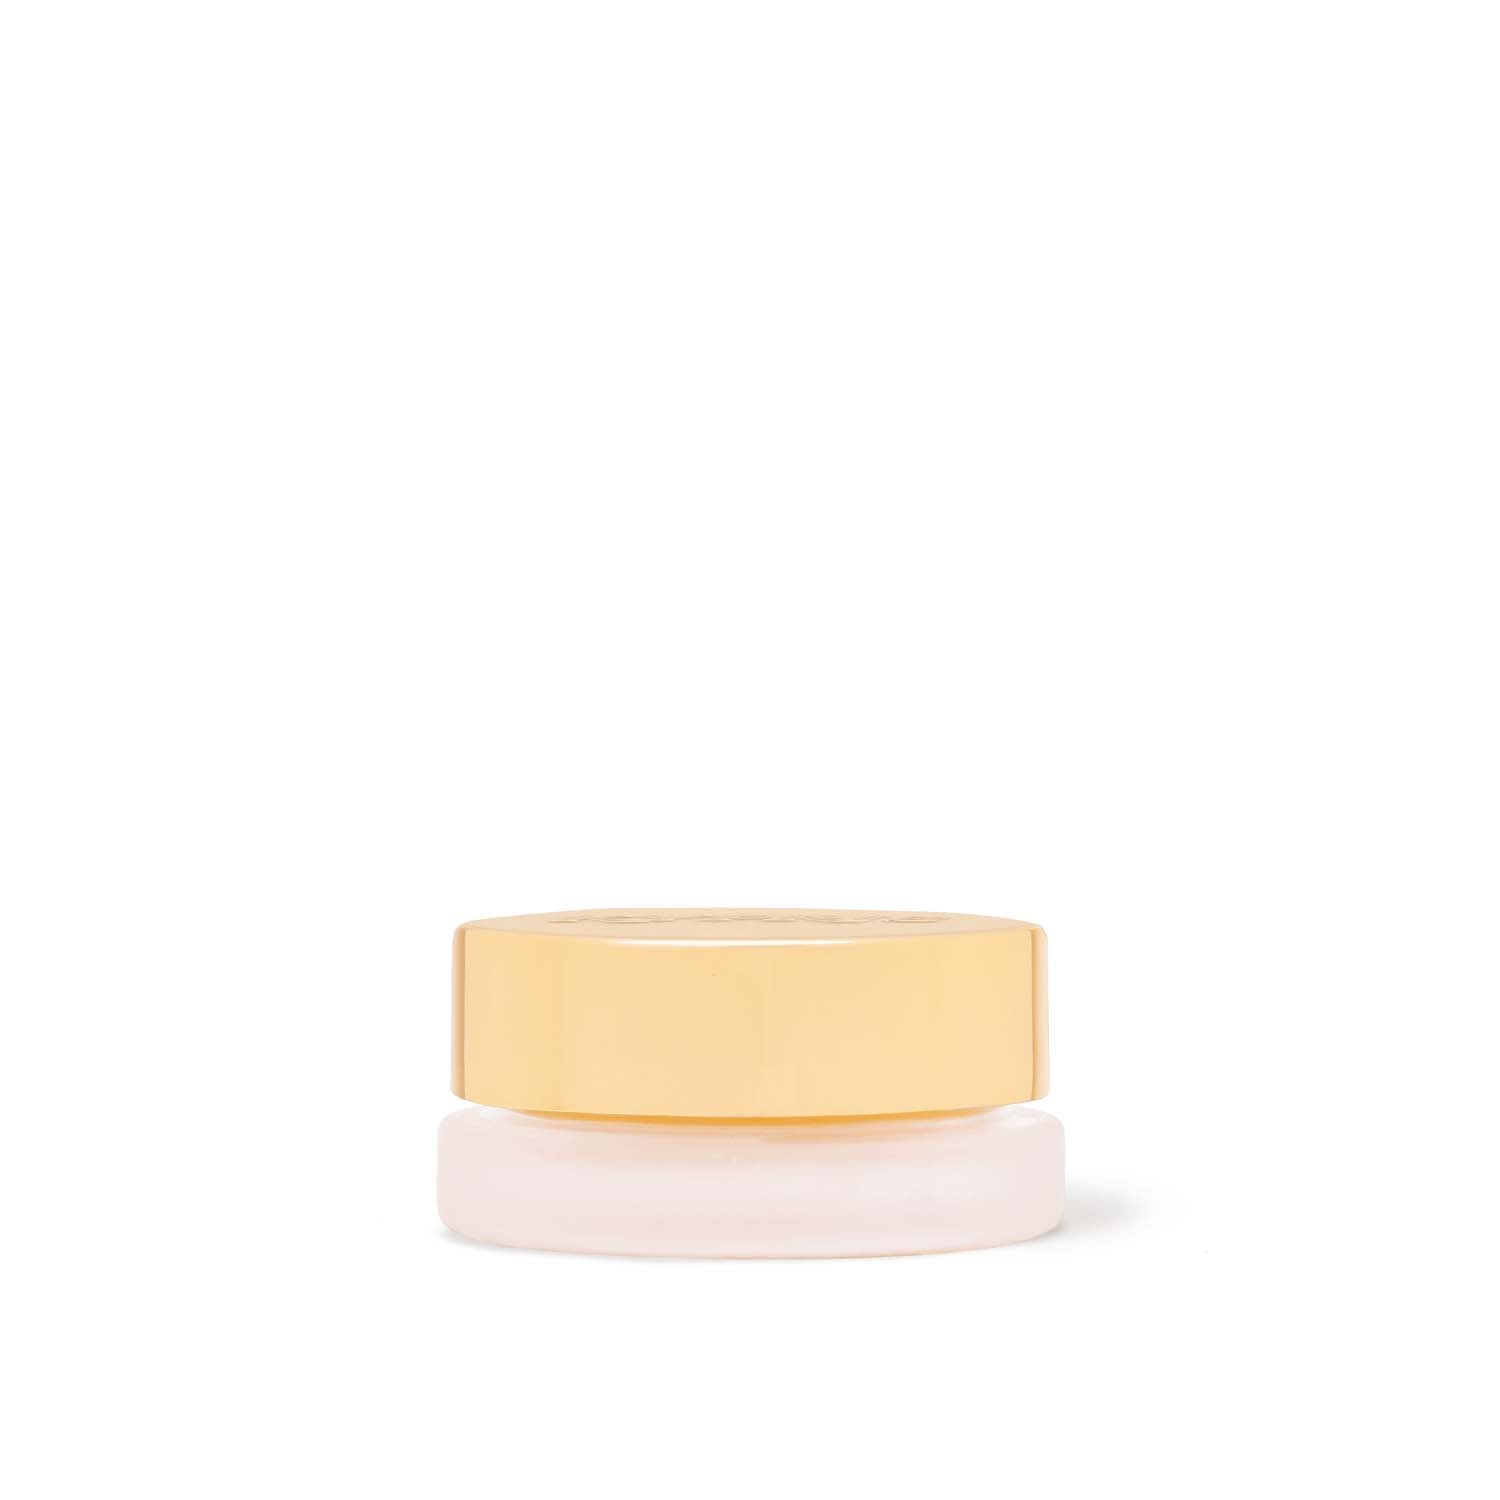 Lip Balm Elixir, in frosted jar with gold lid, on white background.